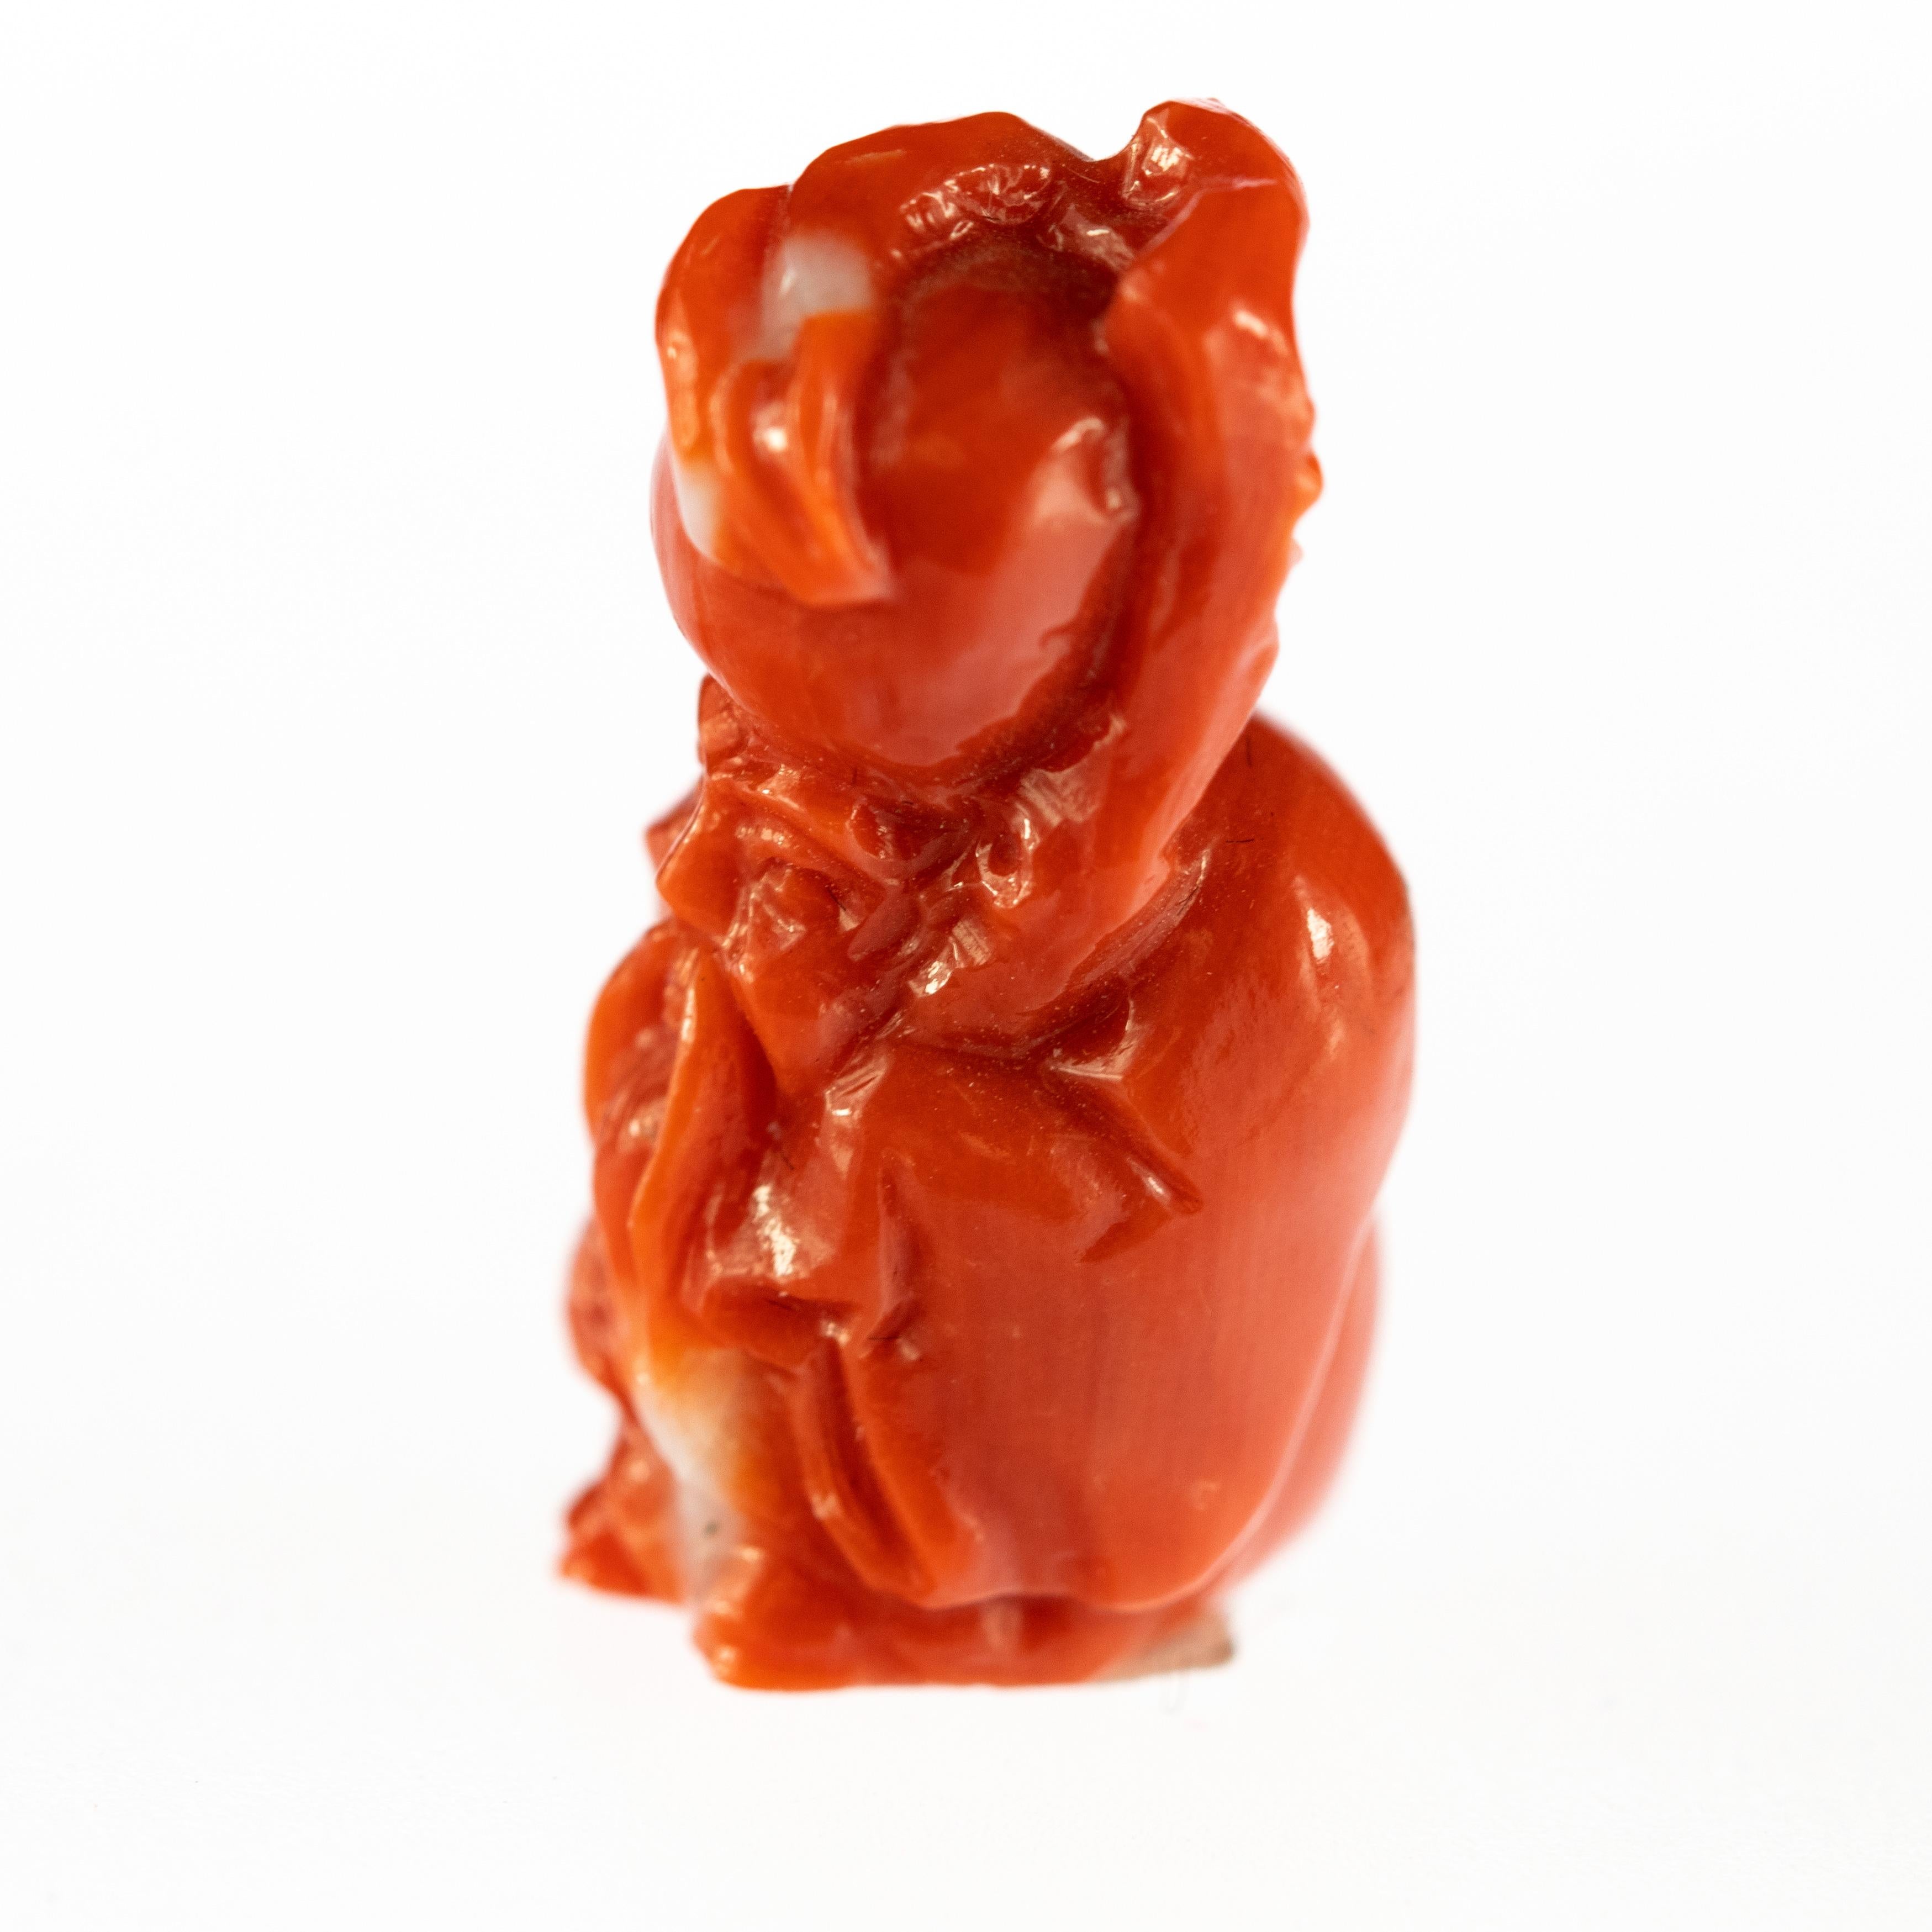 Red Coral has always been one of the most loved materials by humanity, and the level of craft in these art pieces is stunning.

These small miniatures are an example of artisan craft at its best, as you can see by the level of detail in these